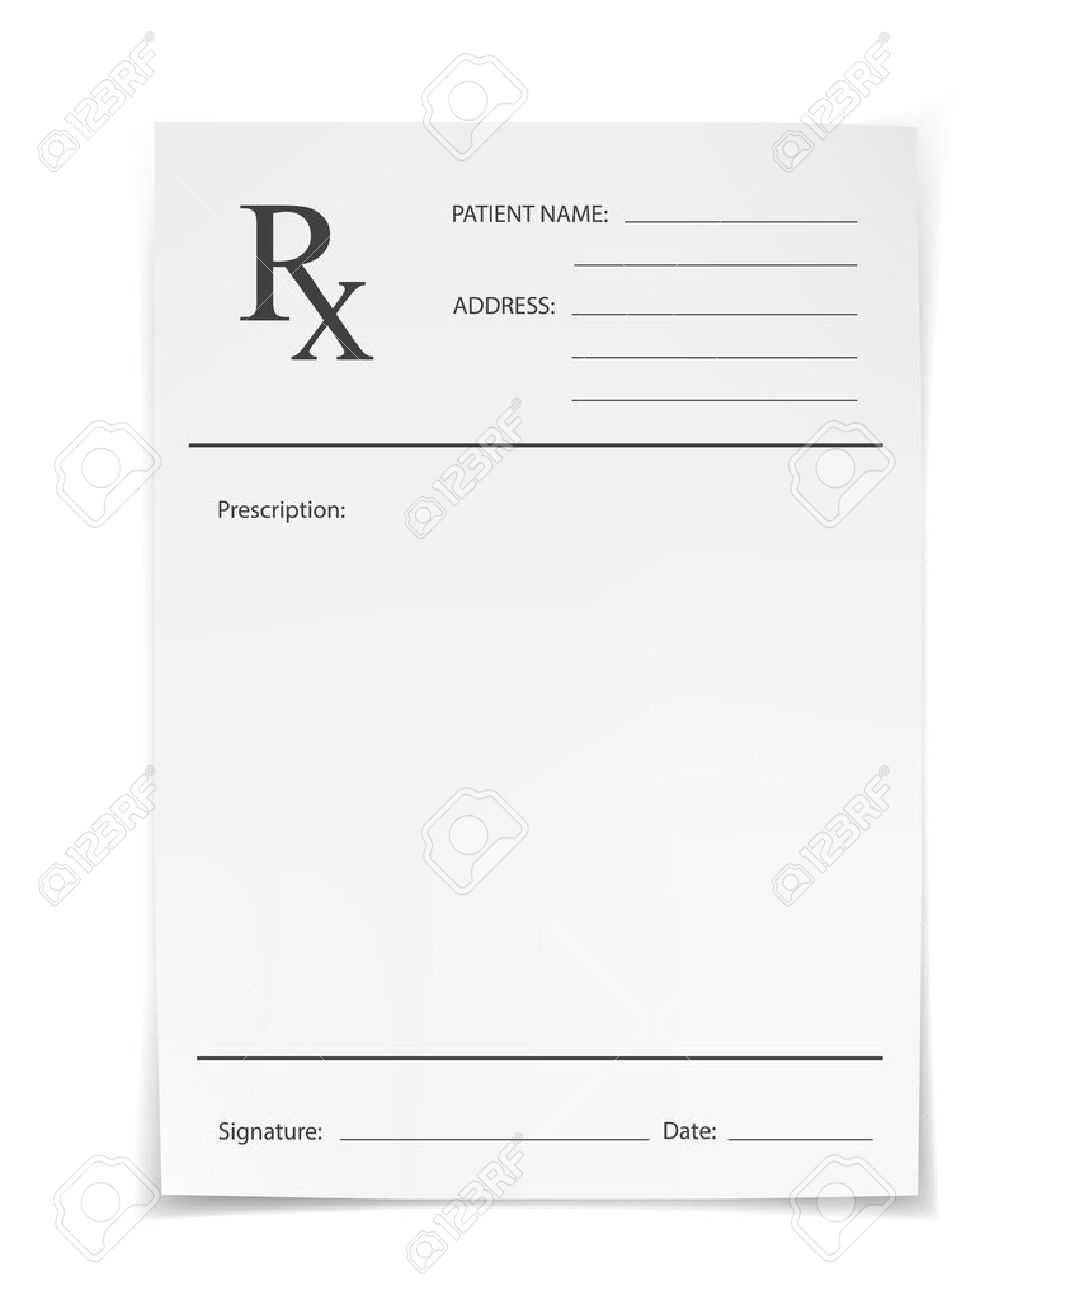 Blank Rx Prescription Form Isolated On White Background Inside Blank Prescription Pad Template